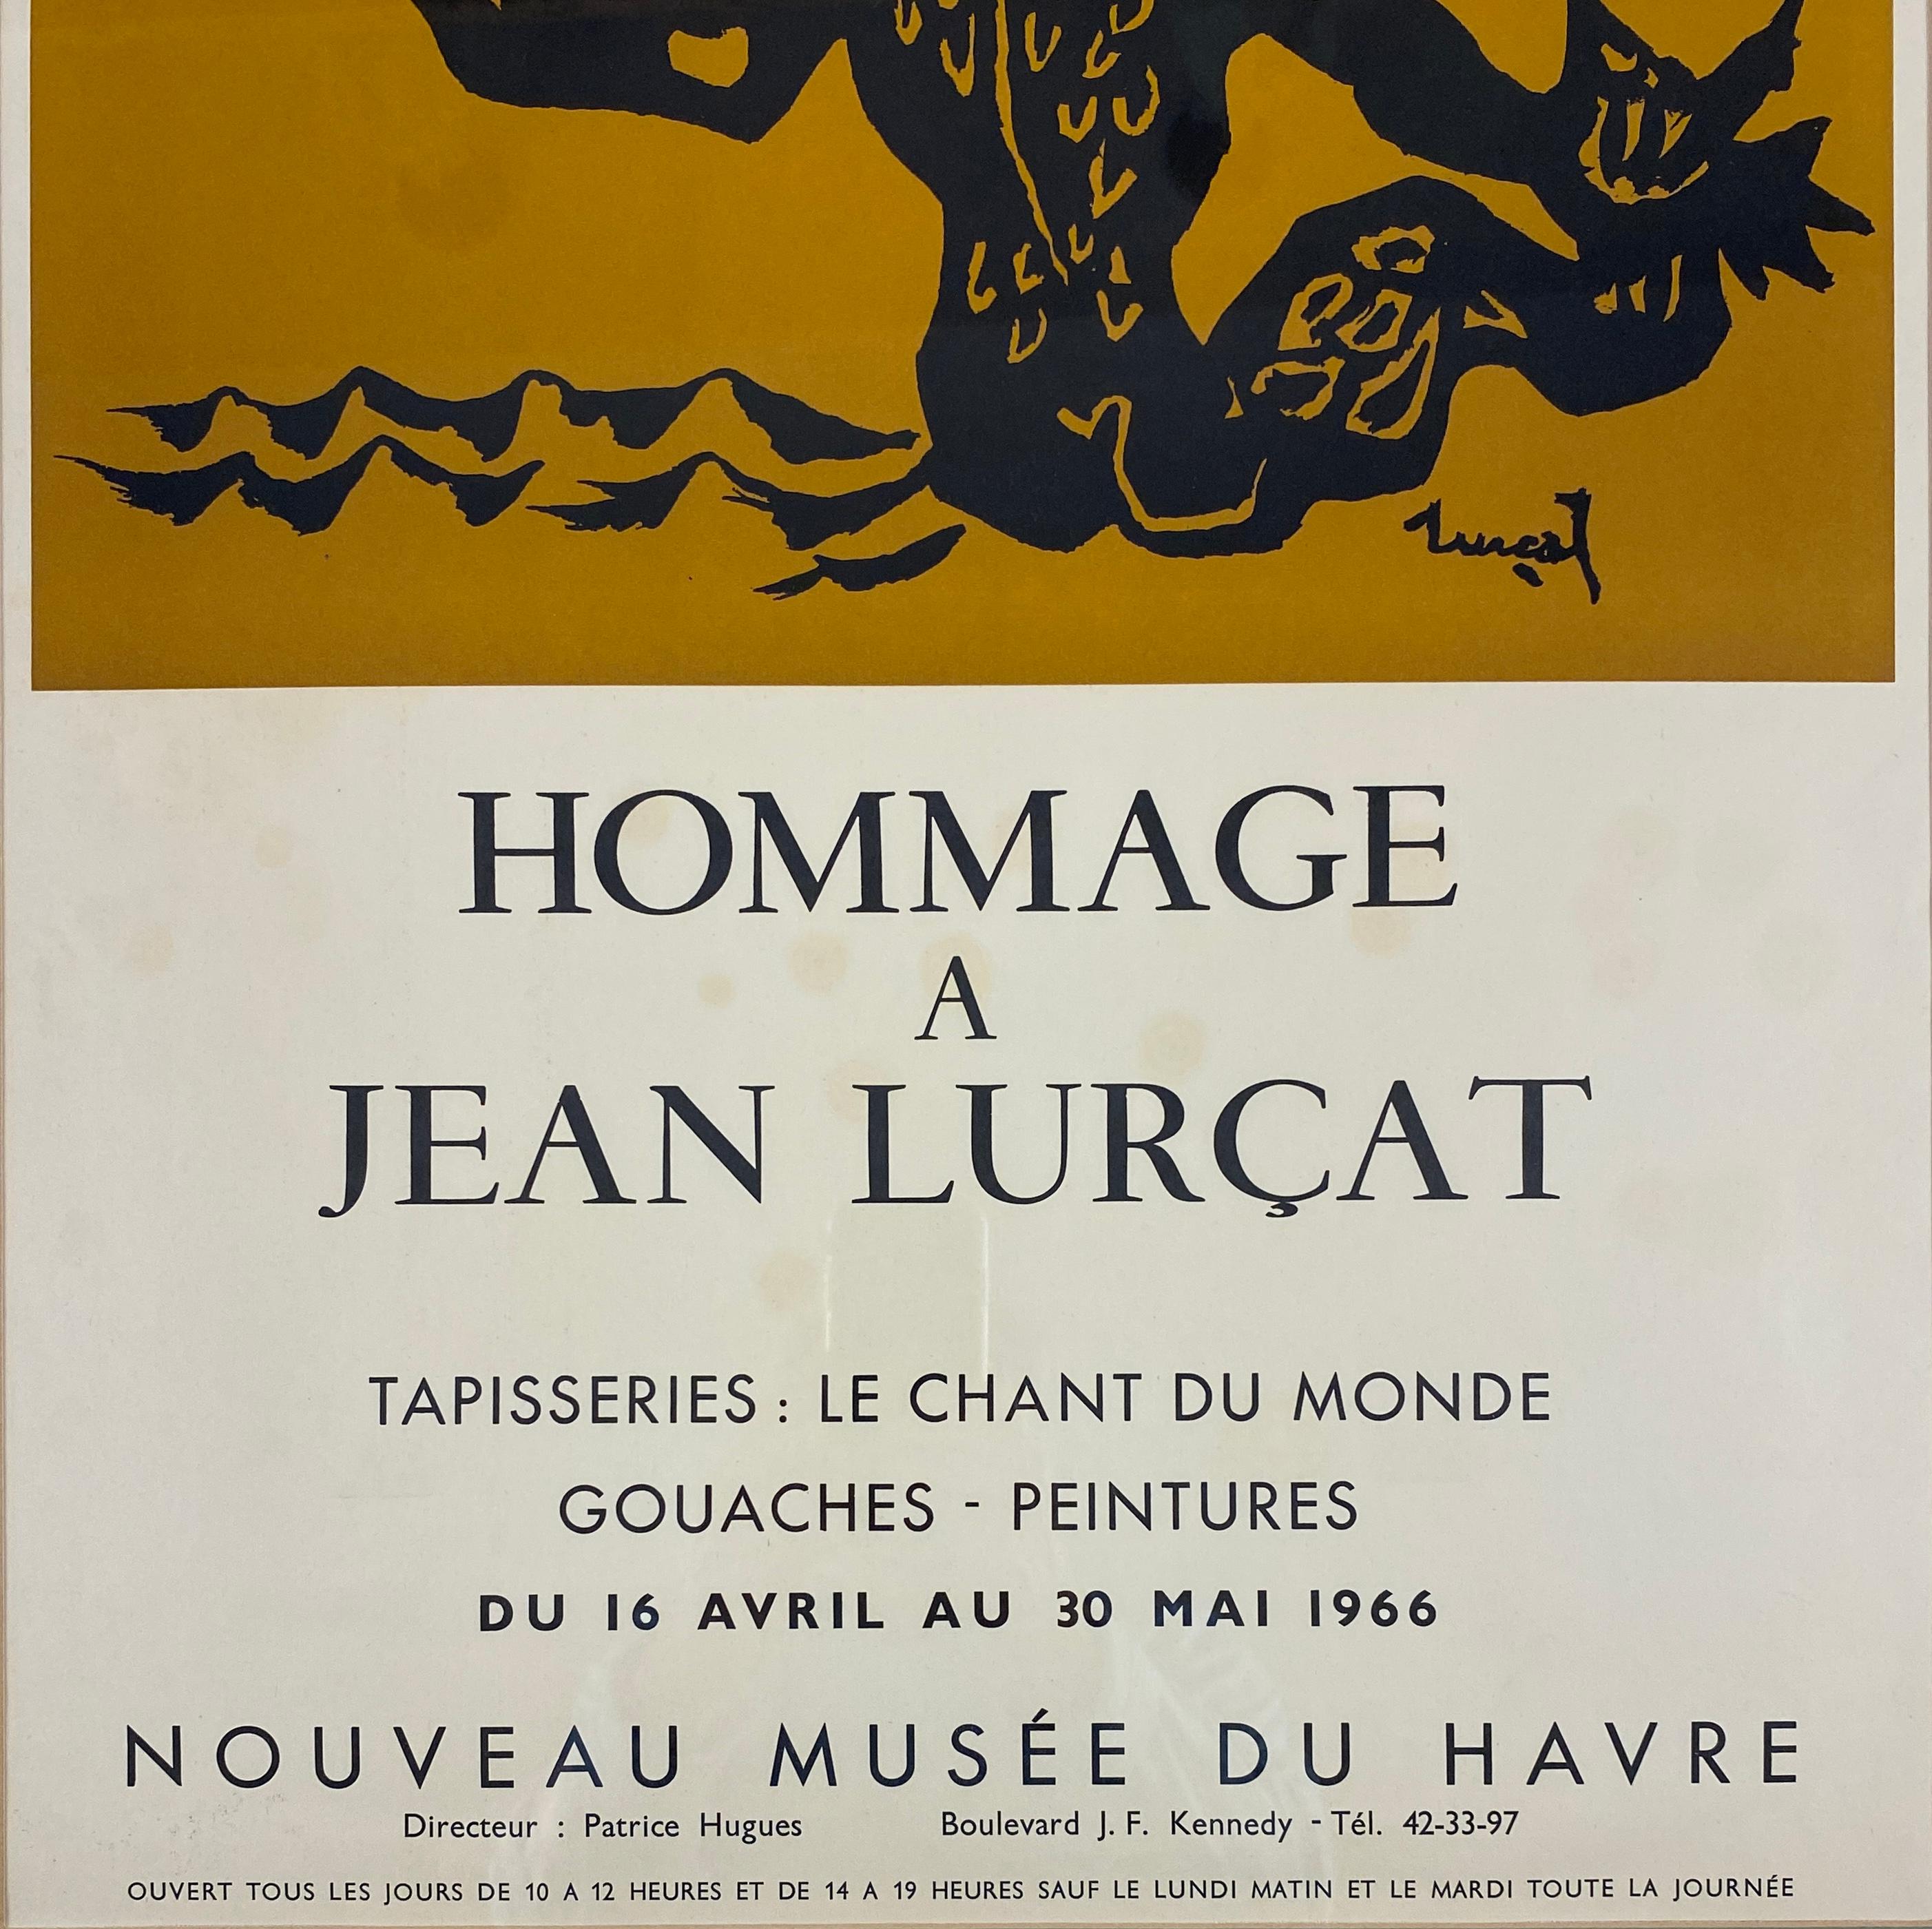 Mid-Century Modern French Mid-20th Century Art Poster Tribute to Jean Lurcat For Sale